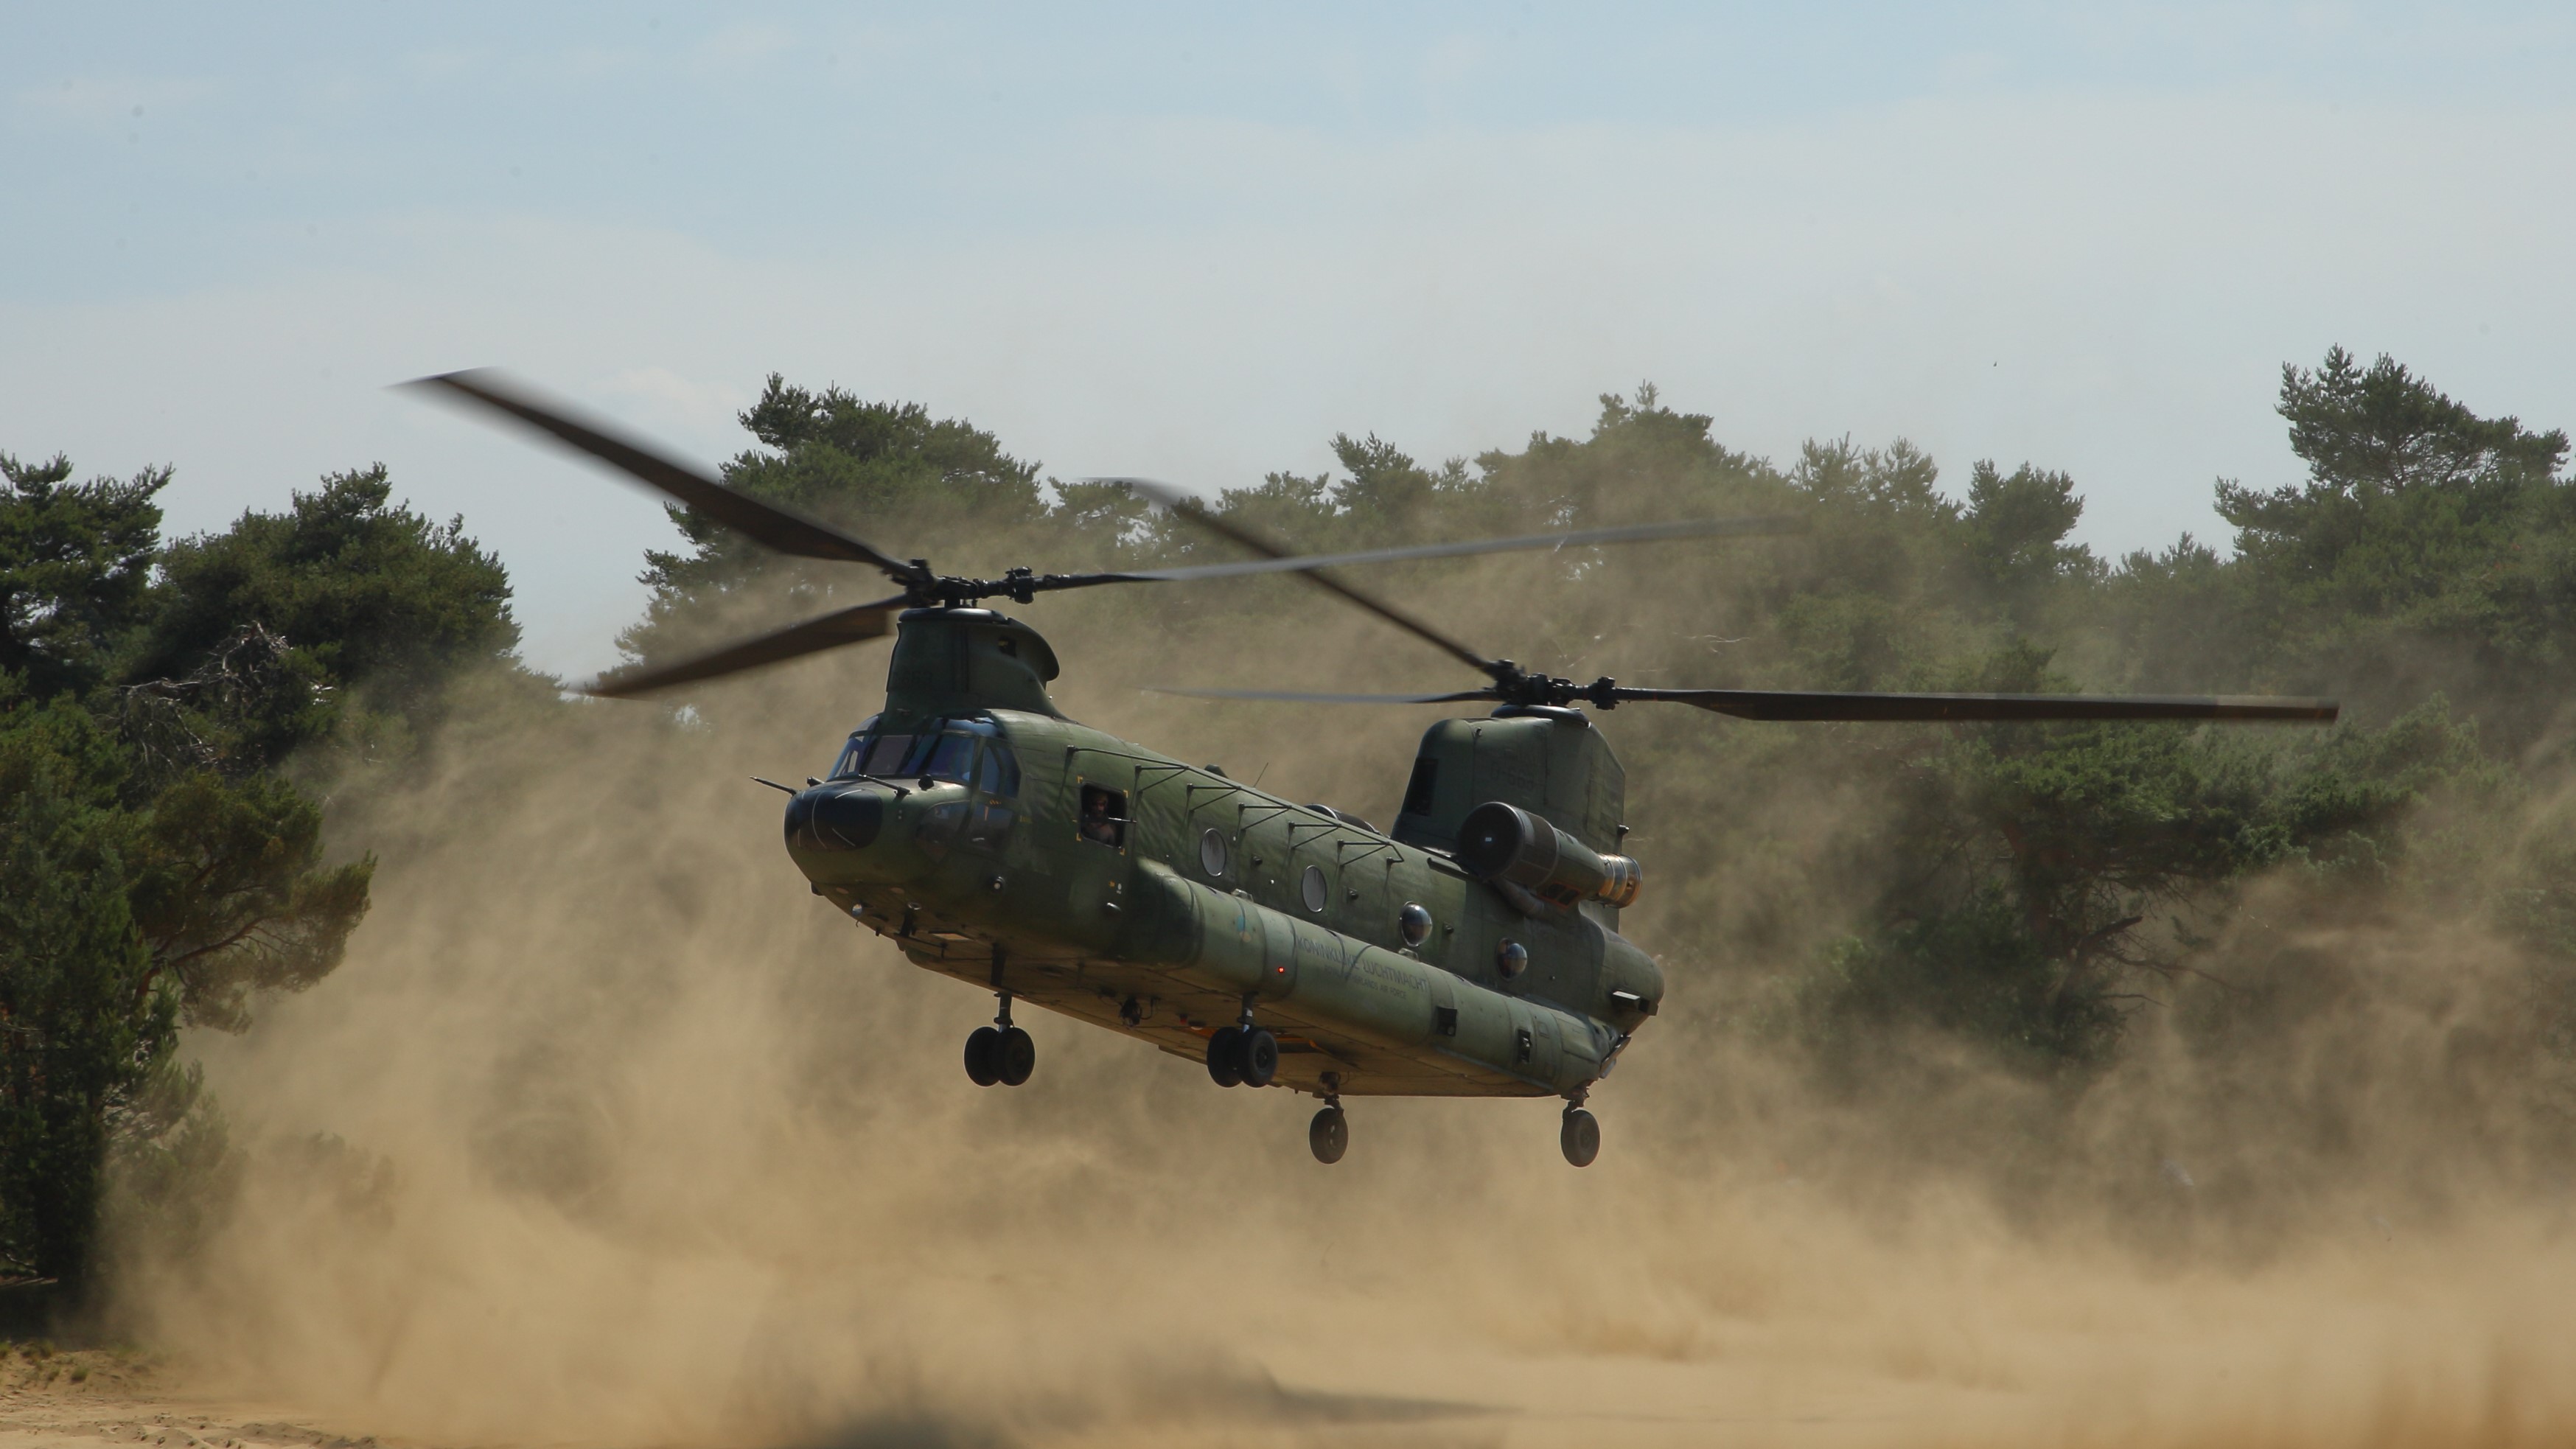 a chinook helicopter taking off in a dusty landscape with trees in the background